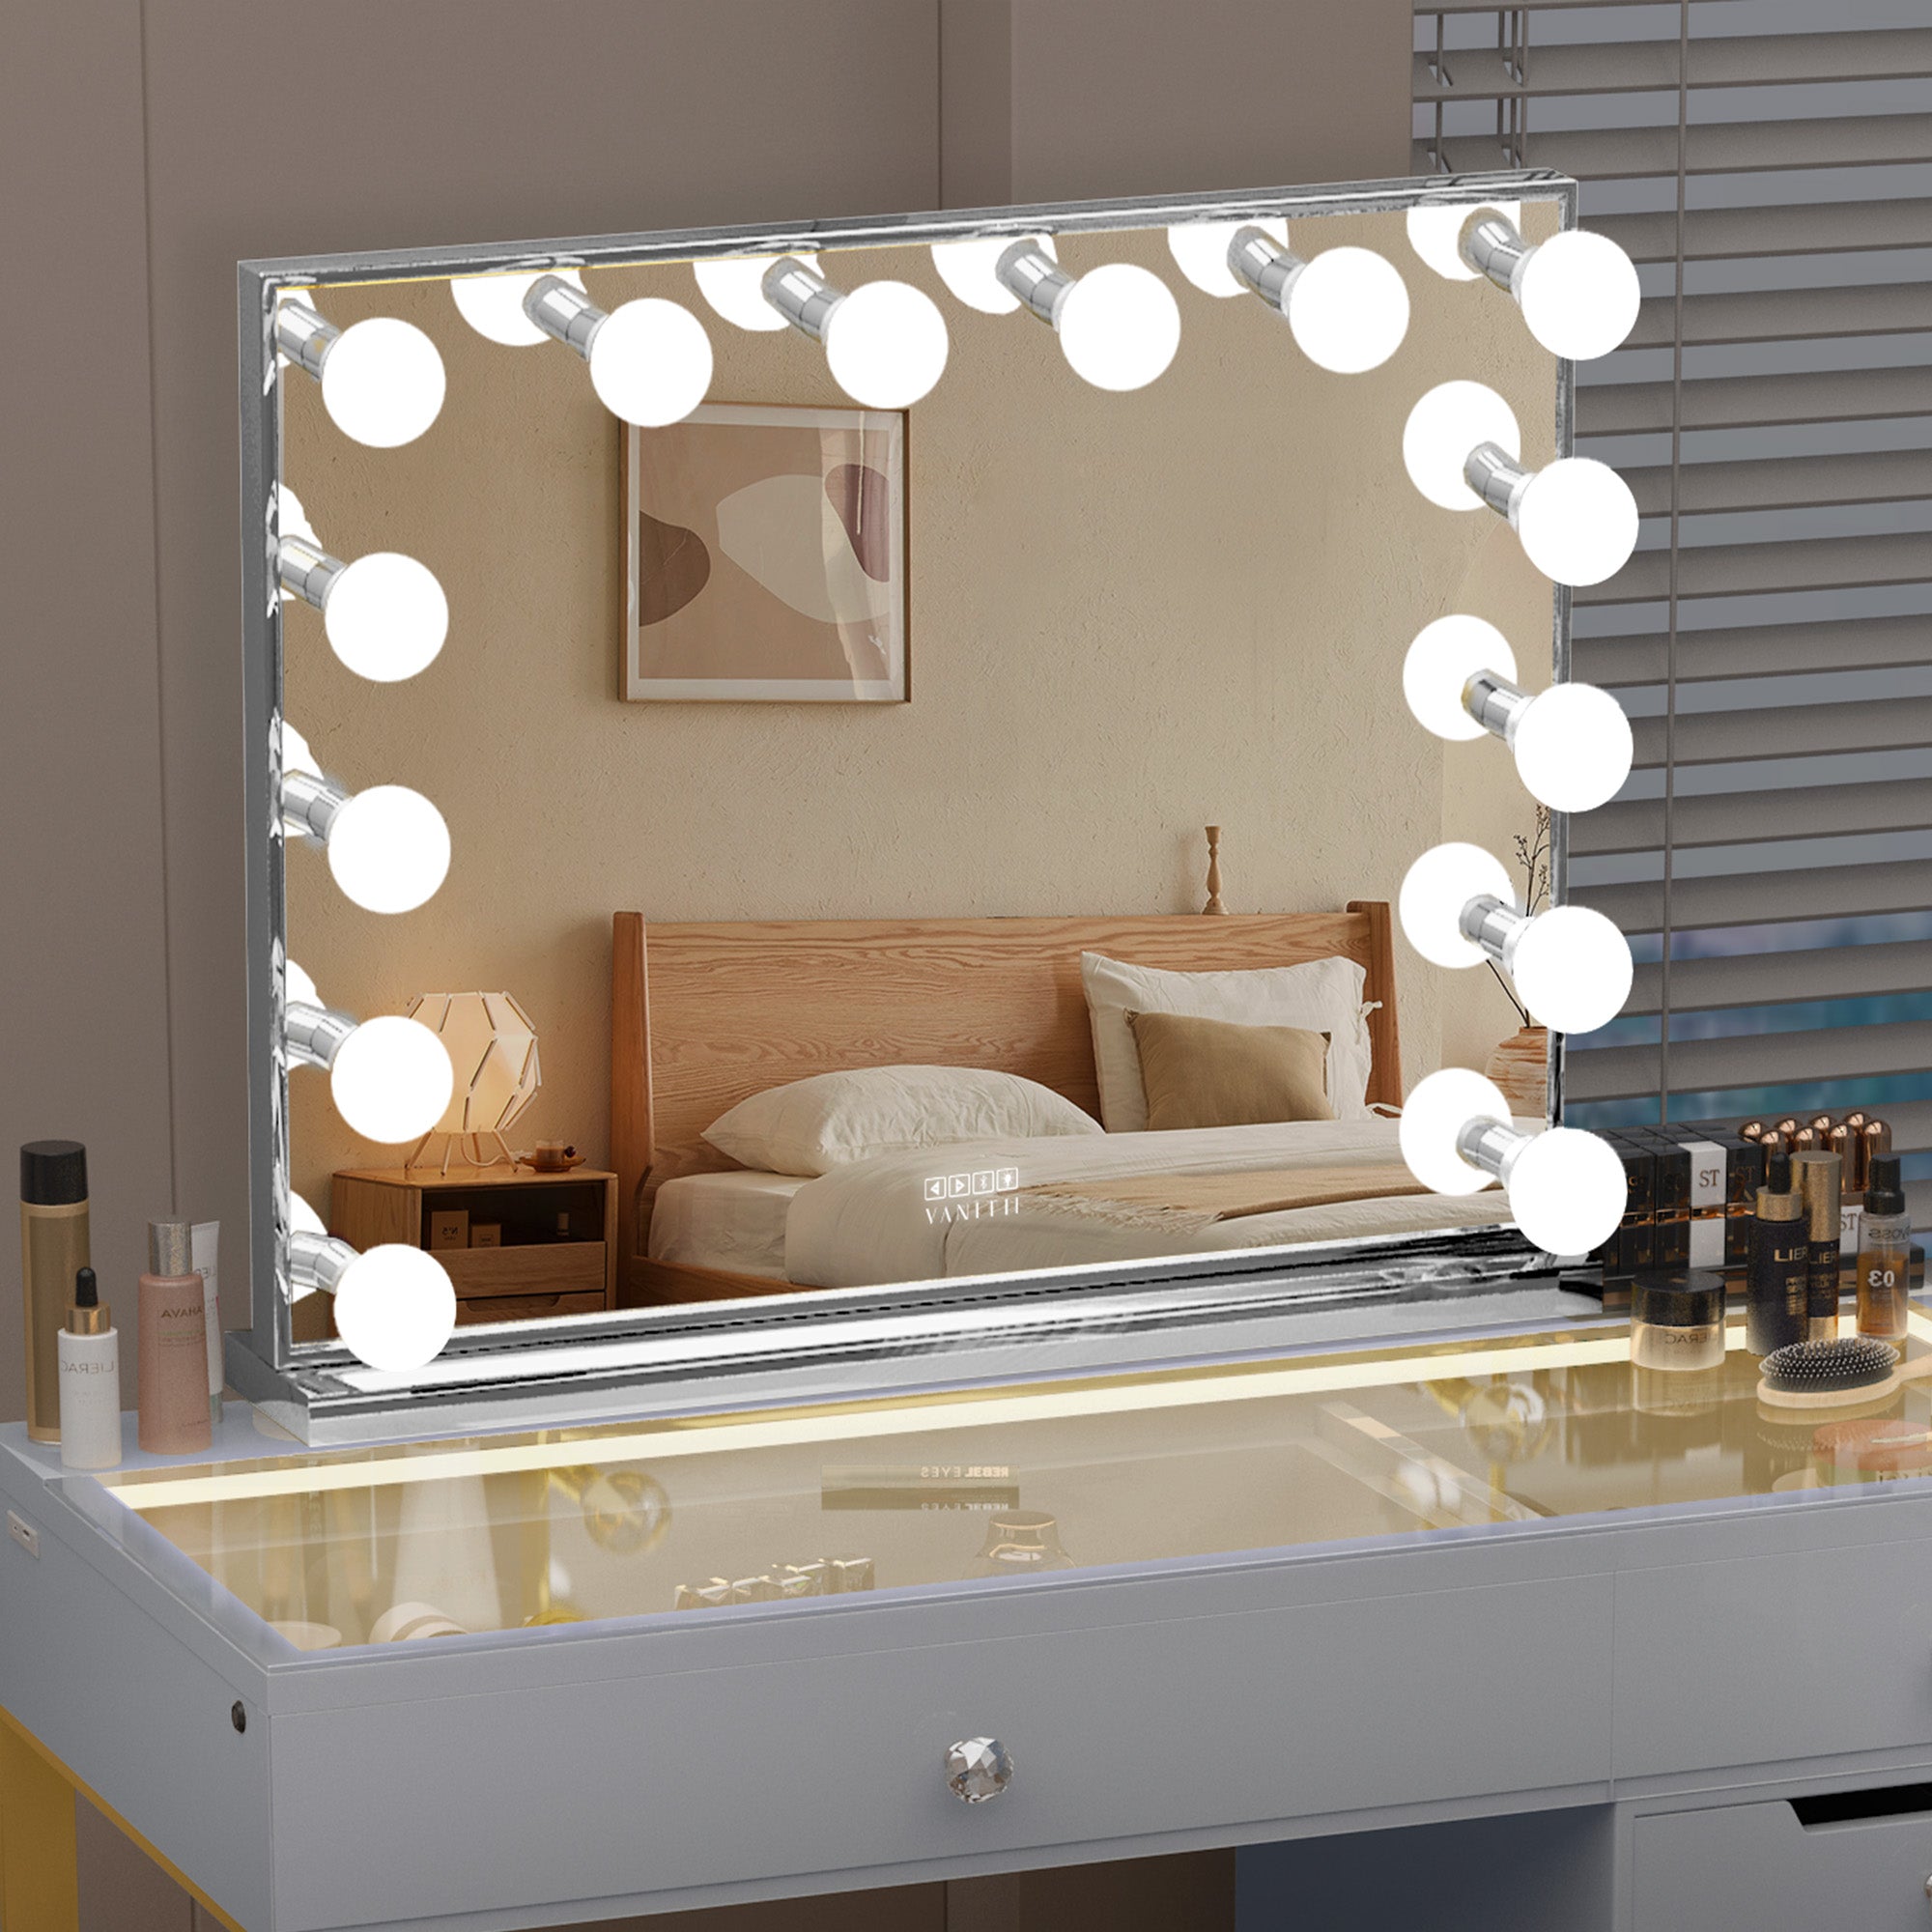 VANITII Chanel Silver Hollywood Vanity Mirror - 14 Dimmable LED Bulbs